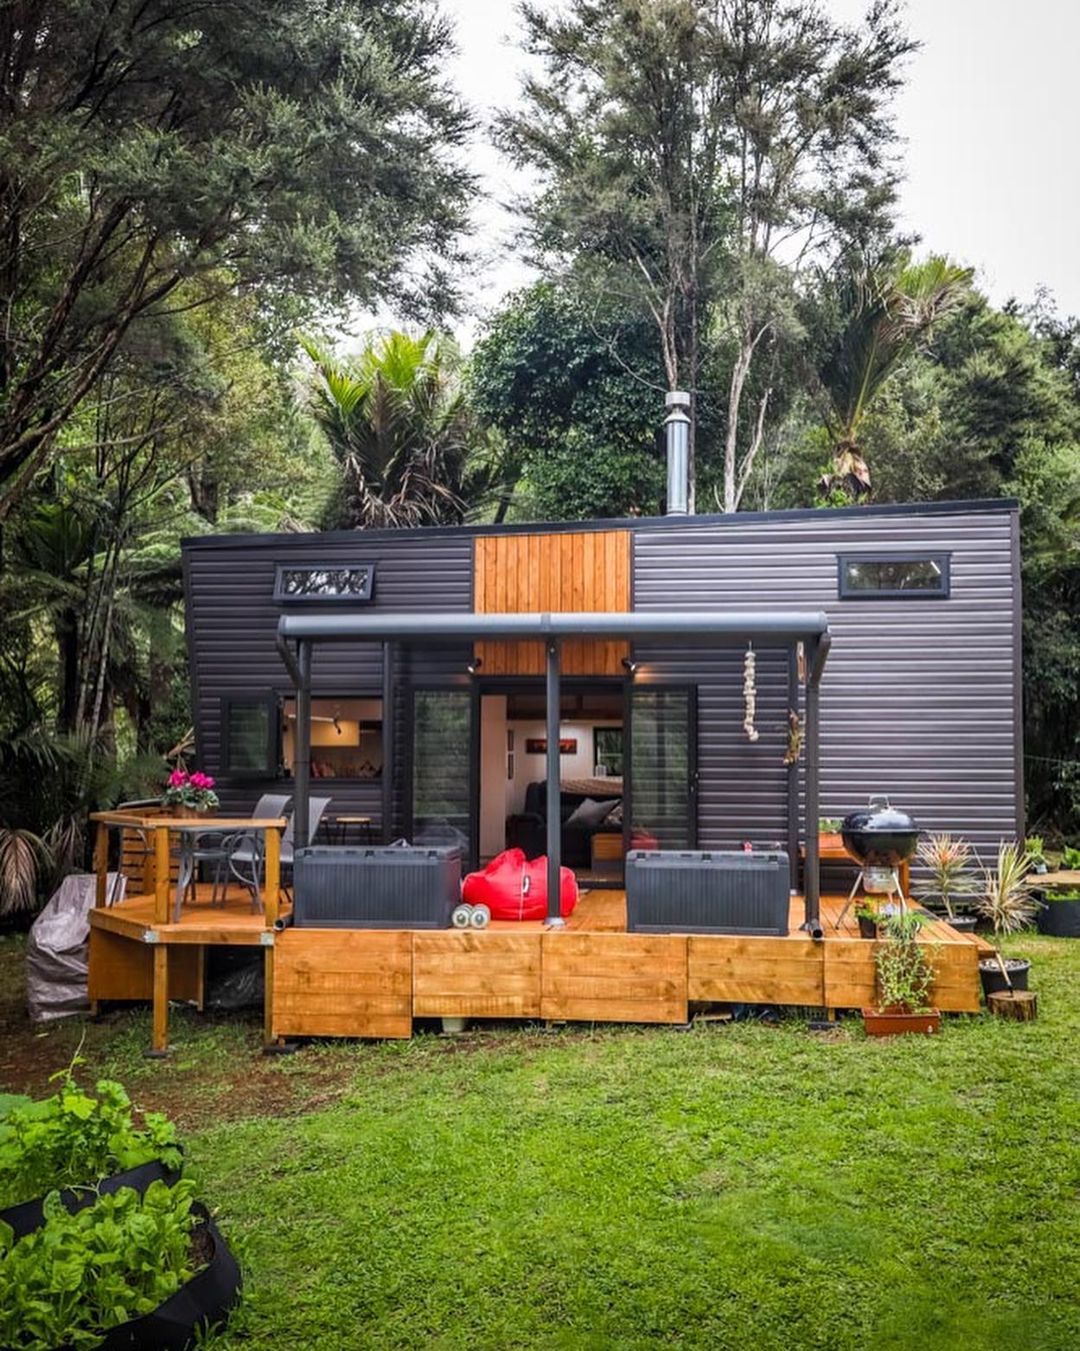 Modern shipping container home with wood accents and a large front porch. Photo by instagram user @livingbiginatinyhouse